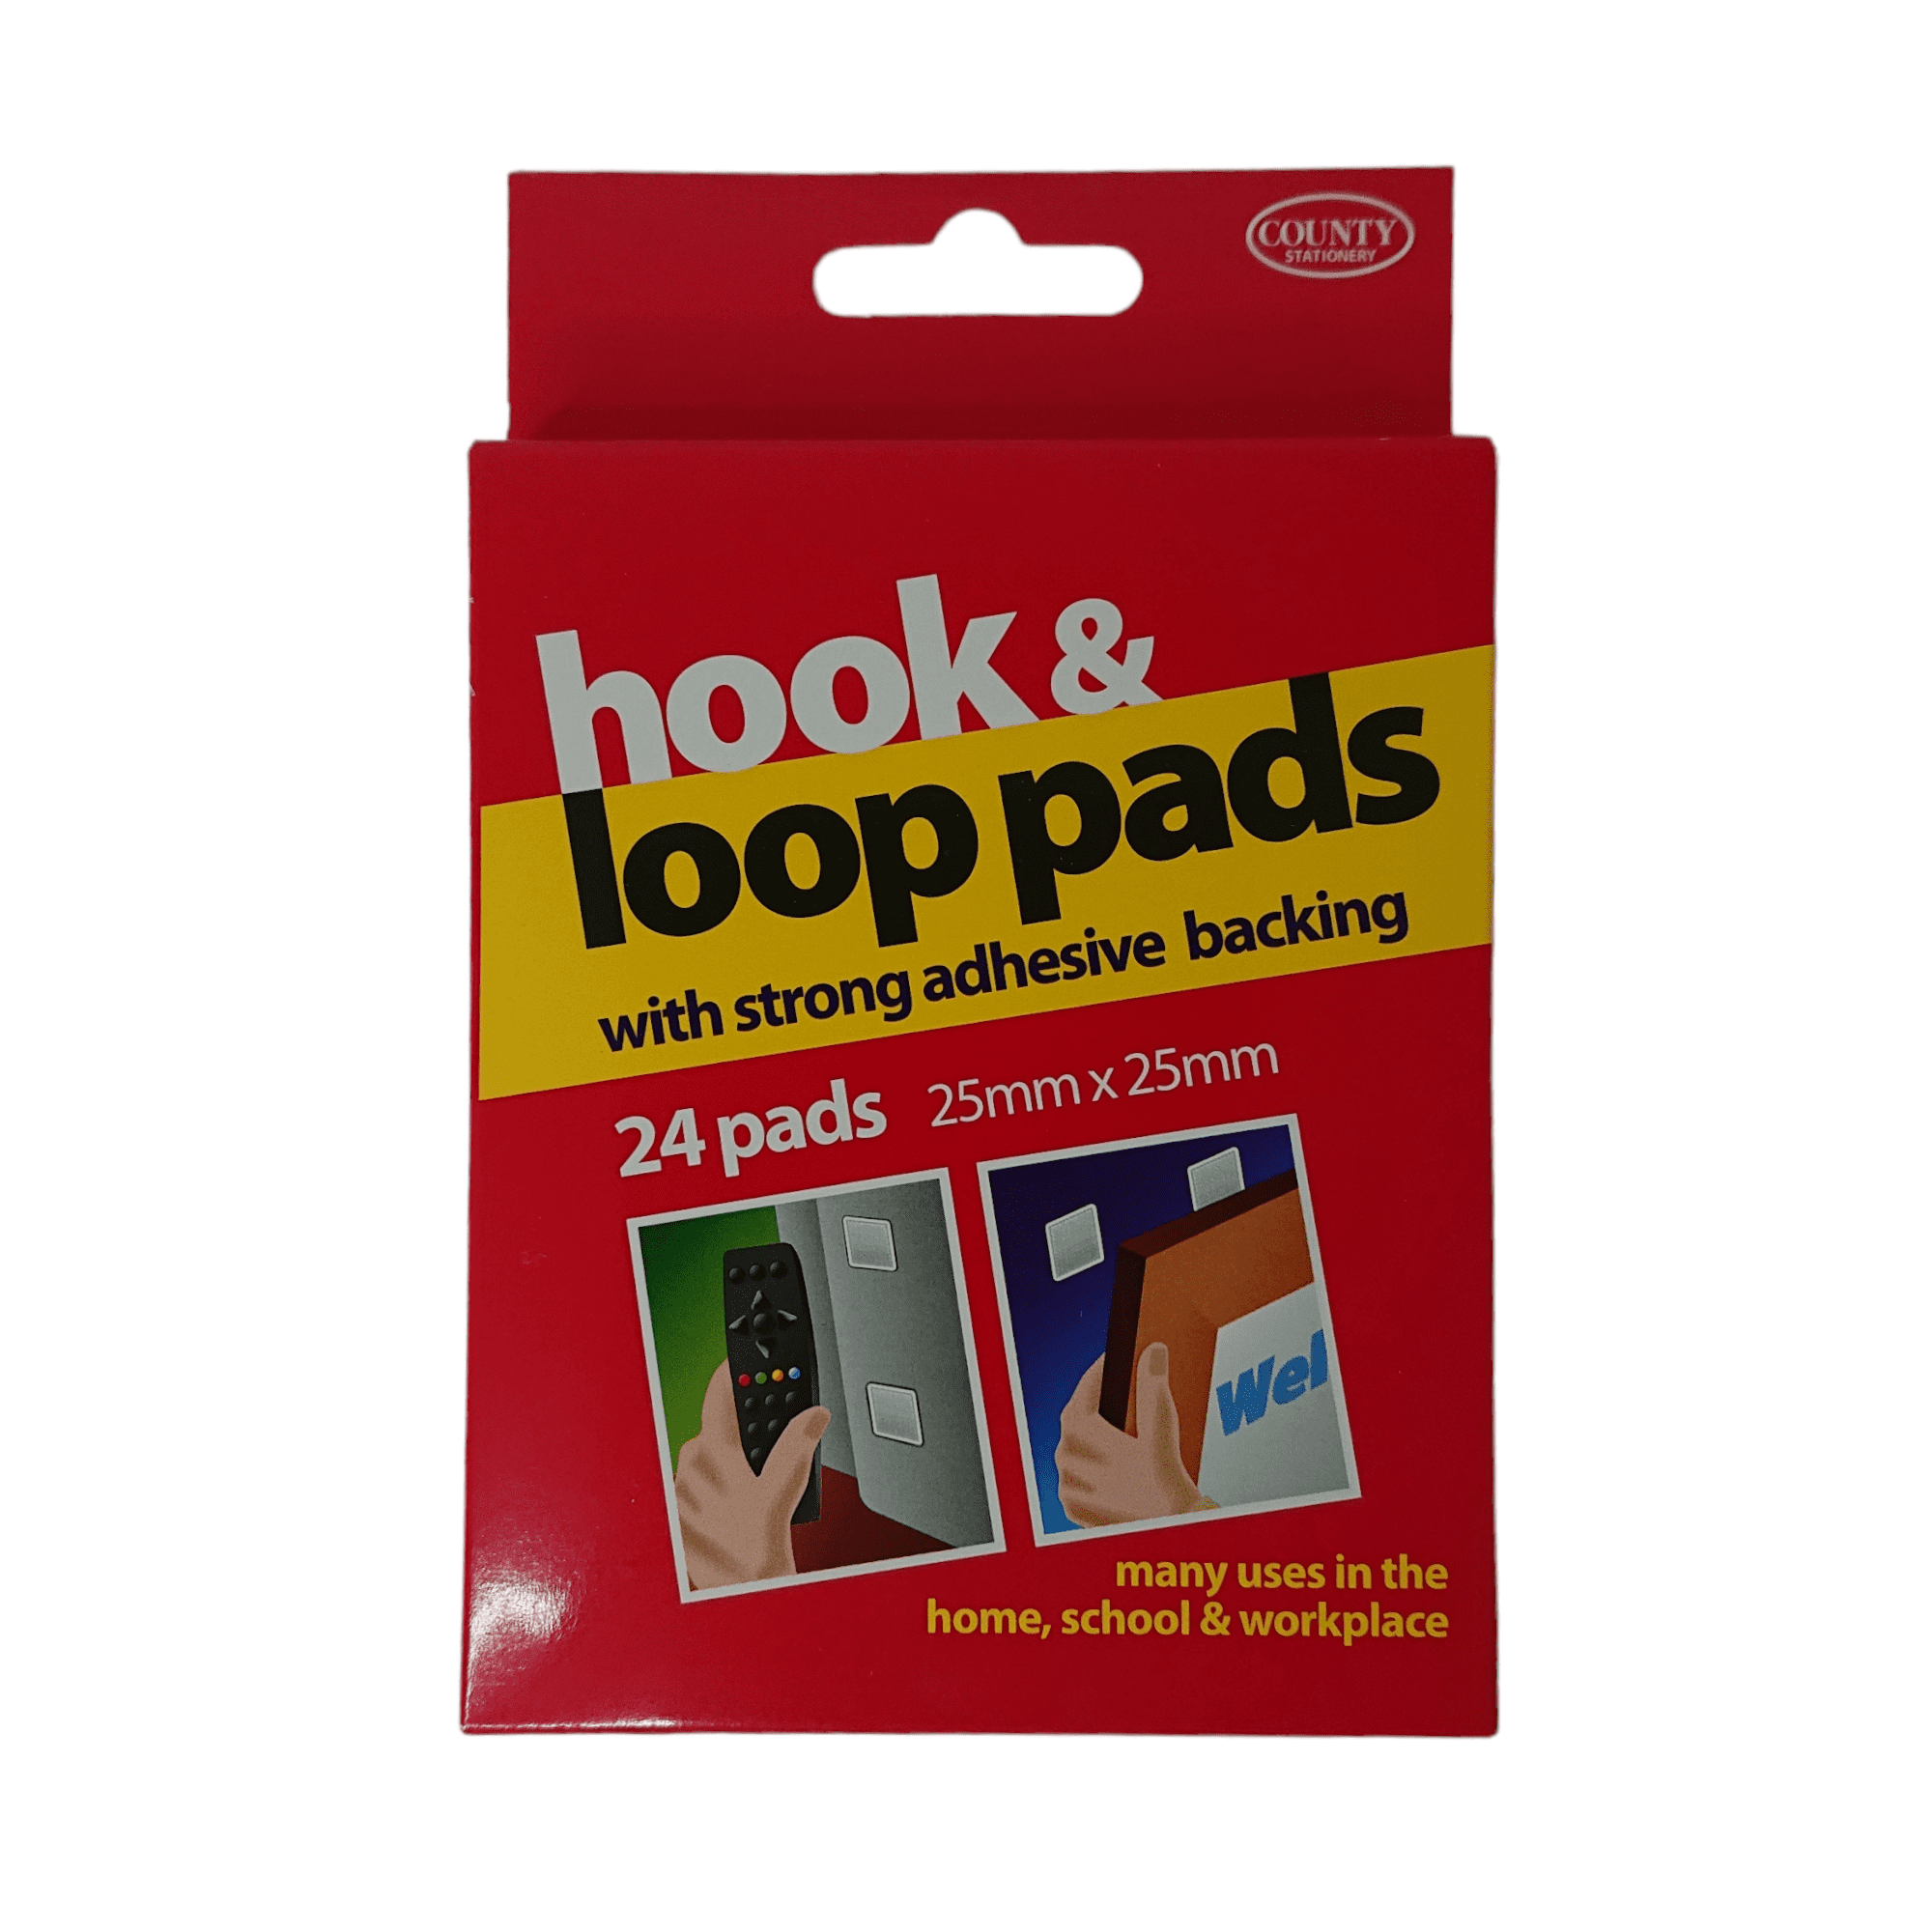 hook and loop pads set, like velcro, with 24 pads 25mm by 25mm, self adhesive